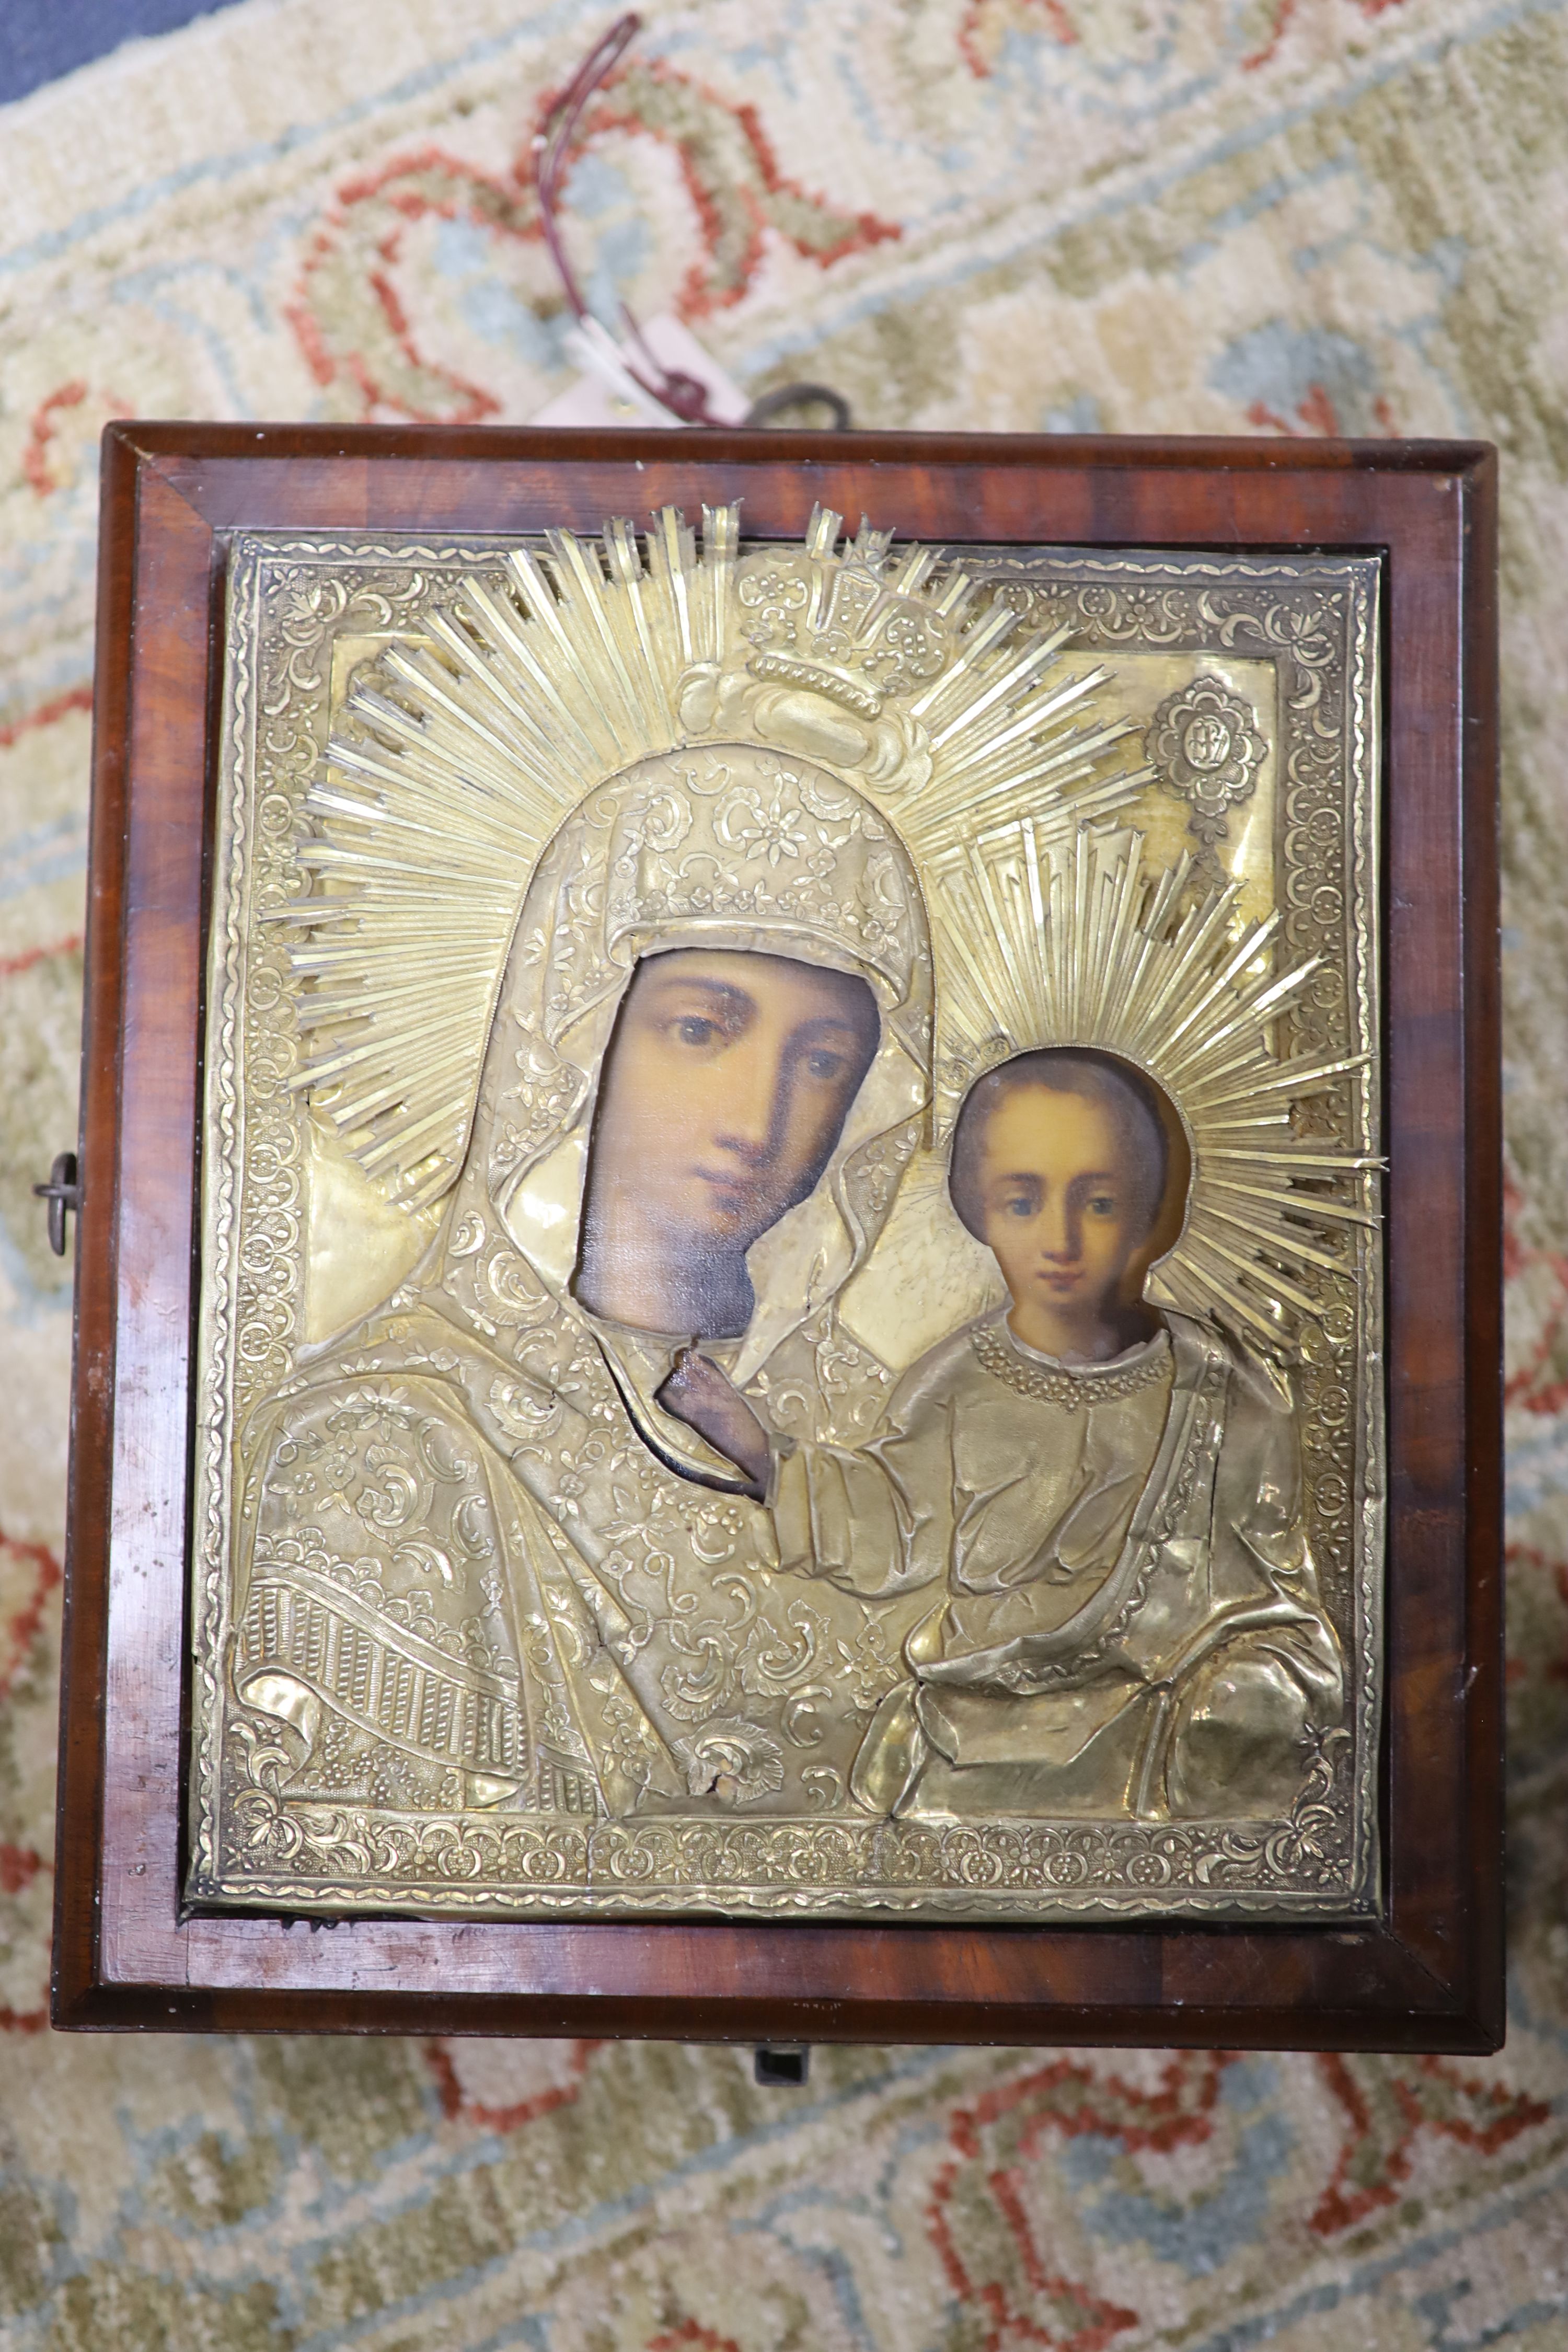 19th Century Russian School. tempera on panel, Icon of the Virgin and Child with silver gilt oklad 23 x 19 cm, case overall 28 x 24cm.